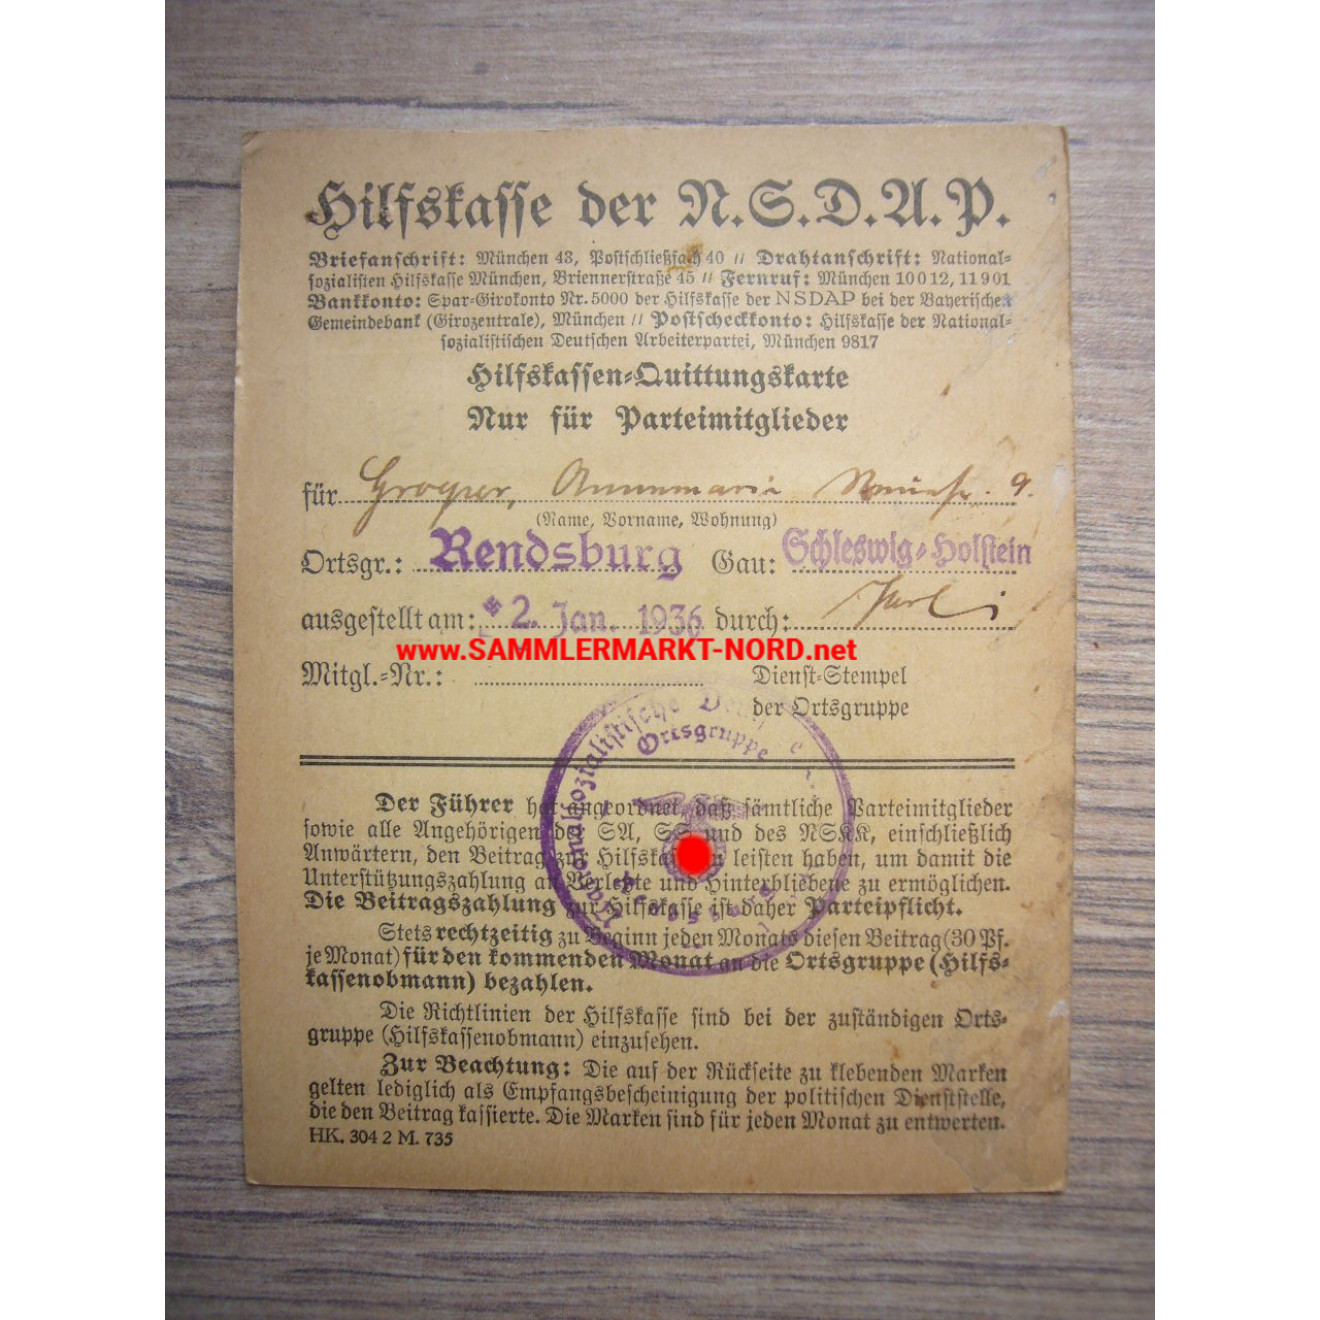 Auxiliary Fund of the NSDAP - Identity Card 1936